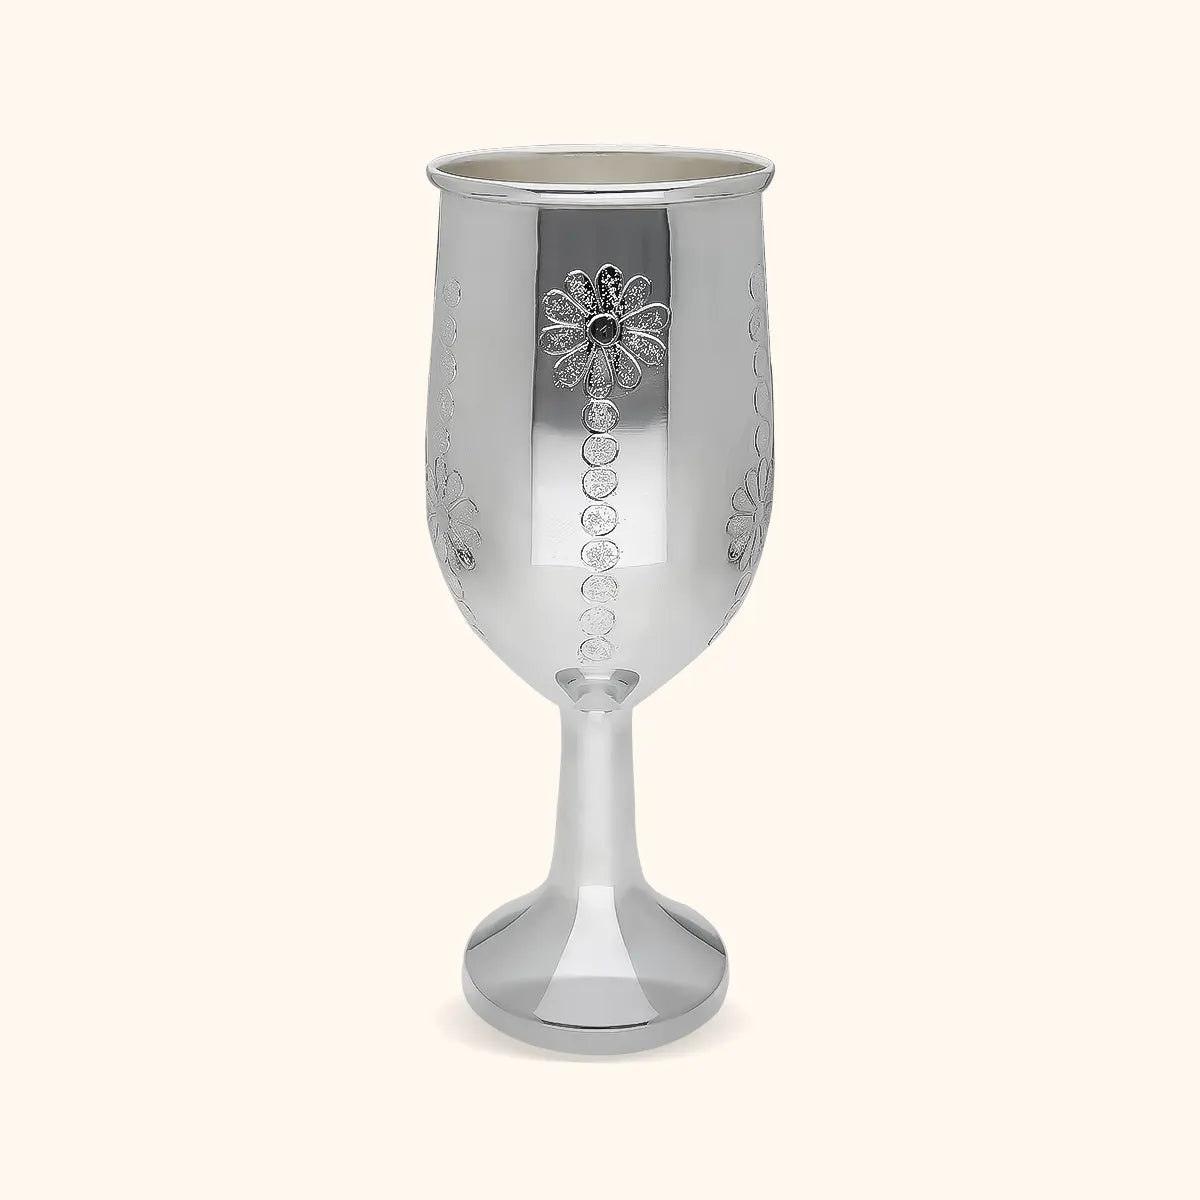 A Touch of Class Silver Wine Glass